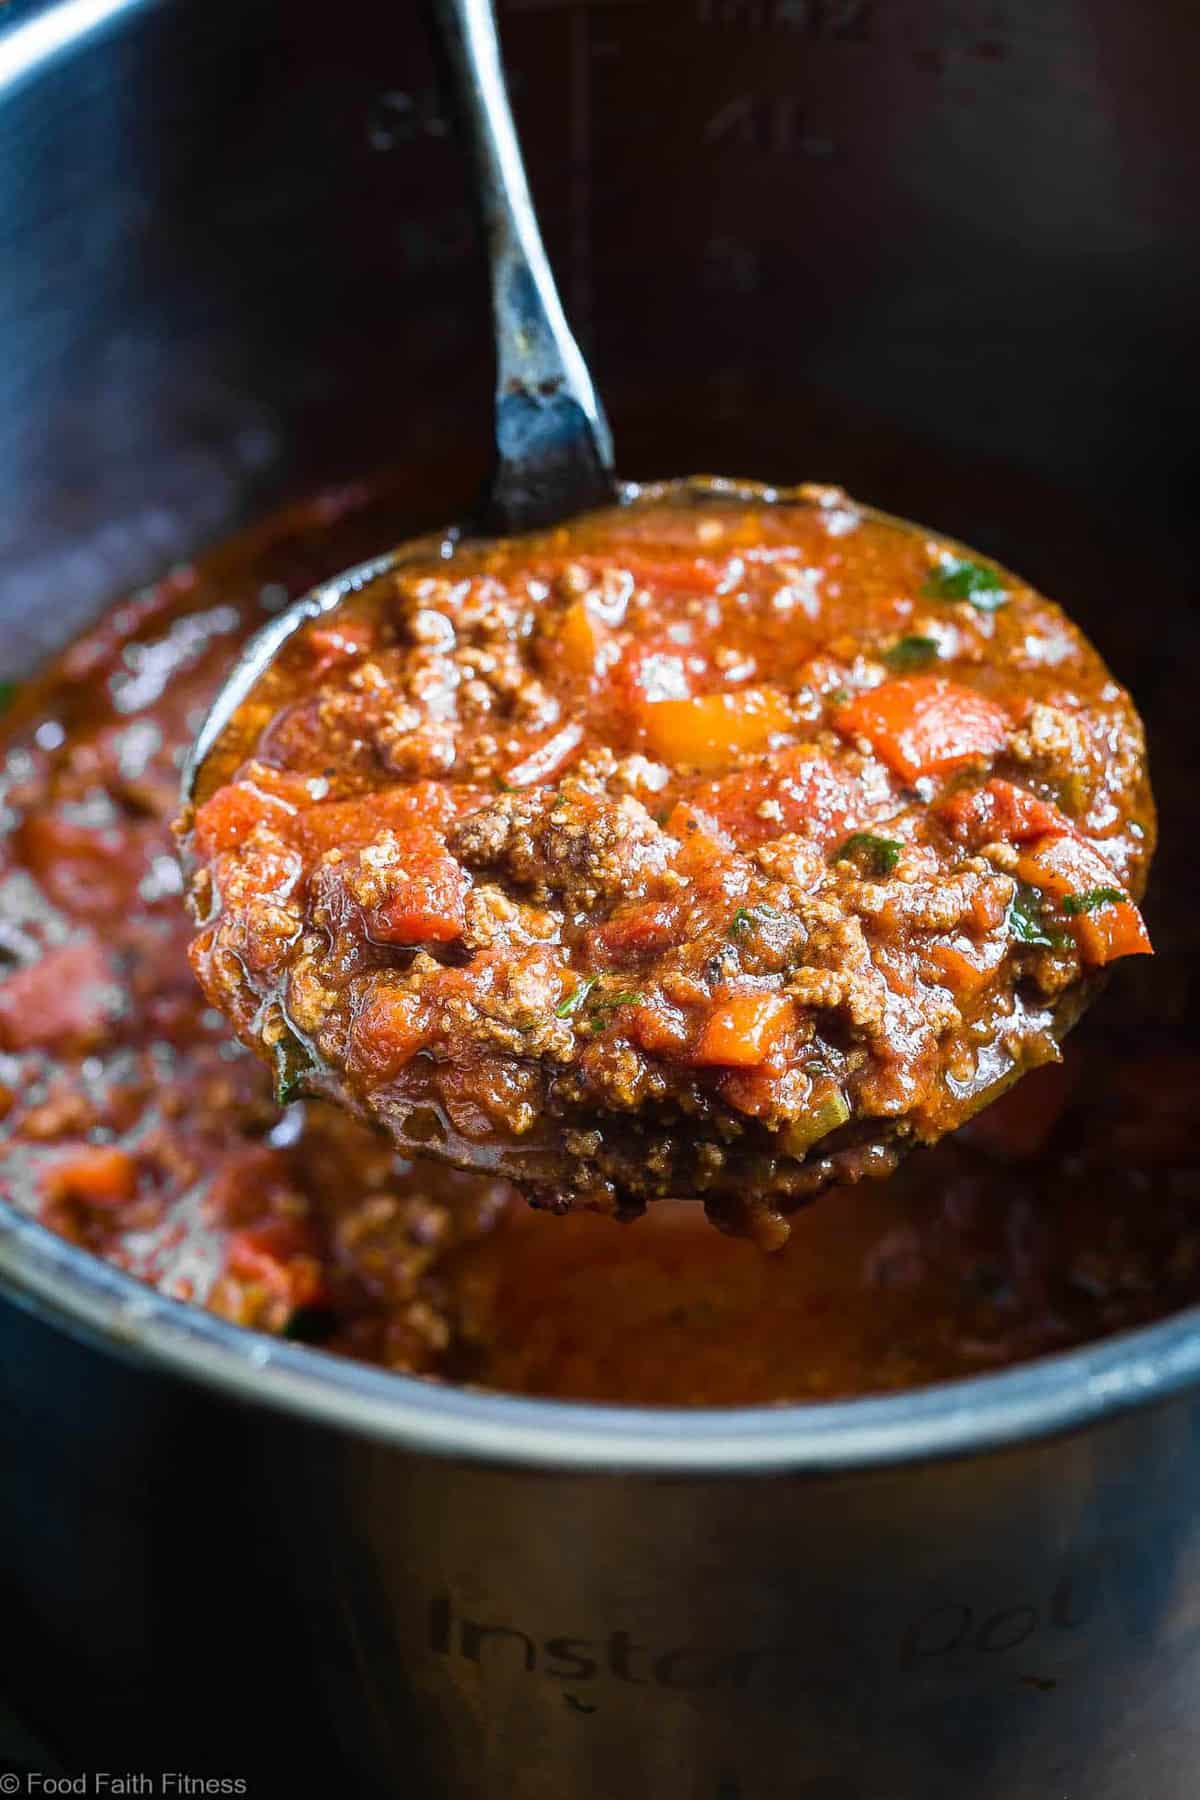 Instant Pot Whole30 Keto Chili Recipe - This paleo chili is a meat lovers dream! It's the easiest healthy weeknight dinner that the whole family will love and it freezes great for leftovers or meal prep! | #Foodfaithfitness | #Keto #Lowcarb #Paleo #Whole3o #InstantPot